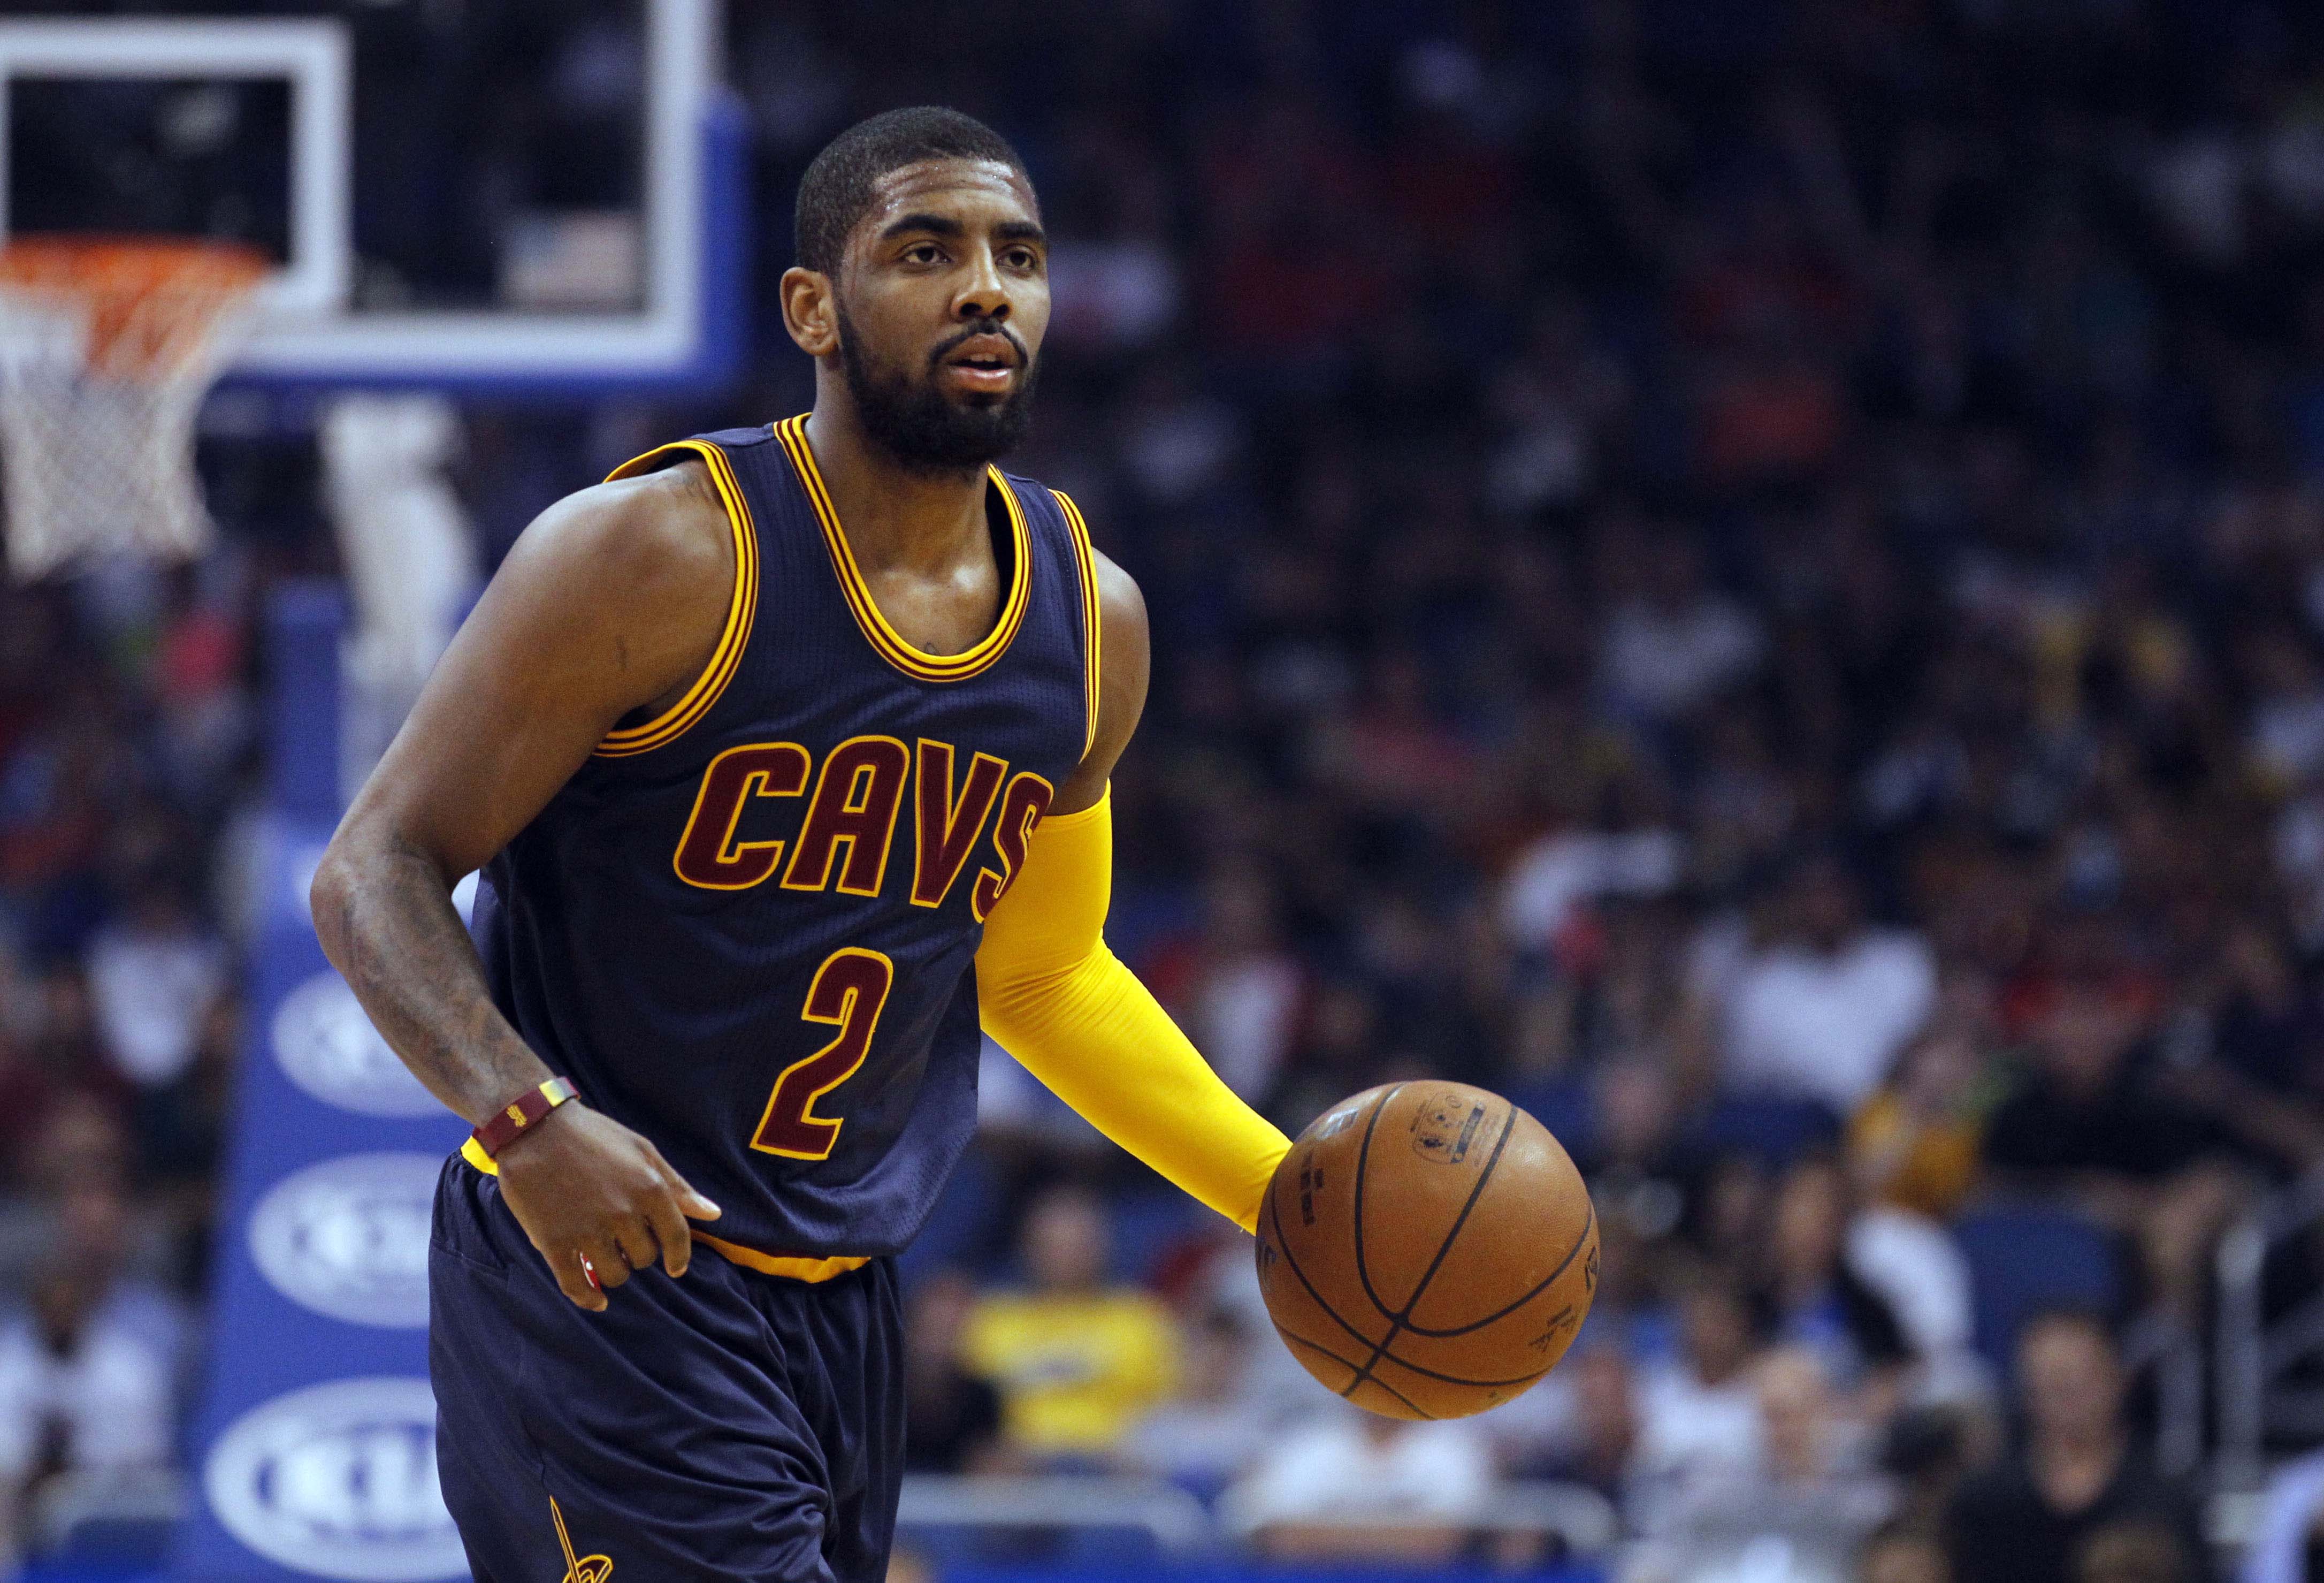 Hd Pictures Of Kyrie Irving - HD Wallpaper 